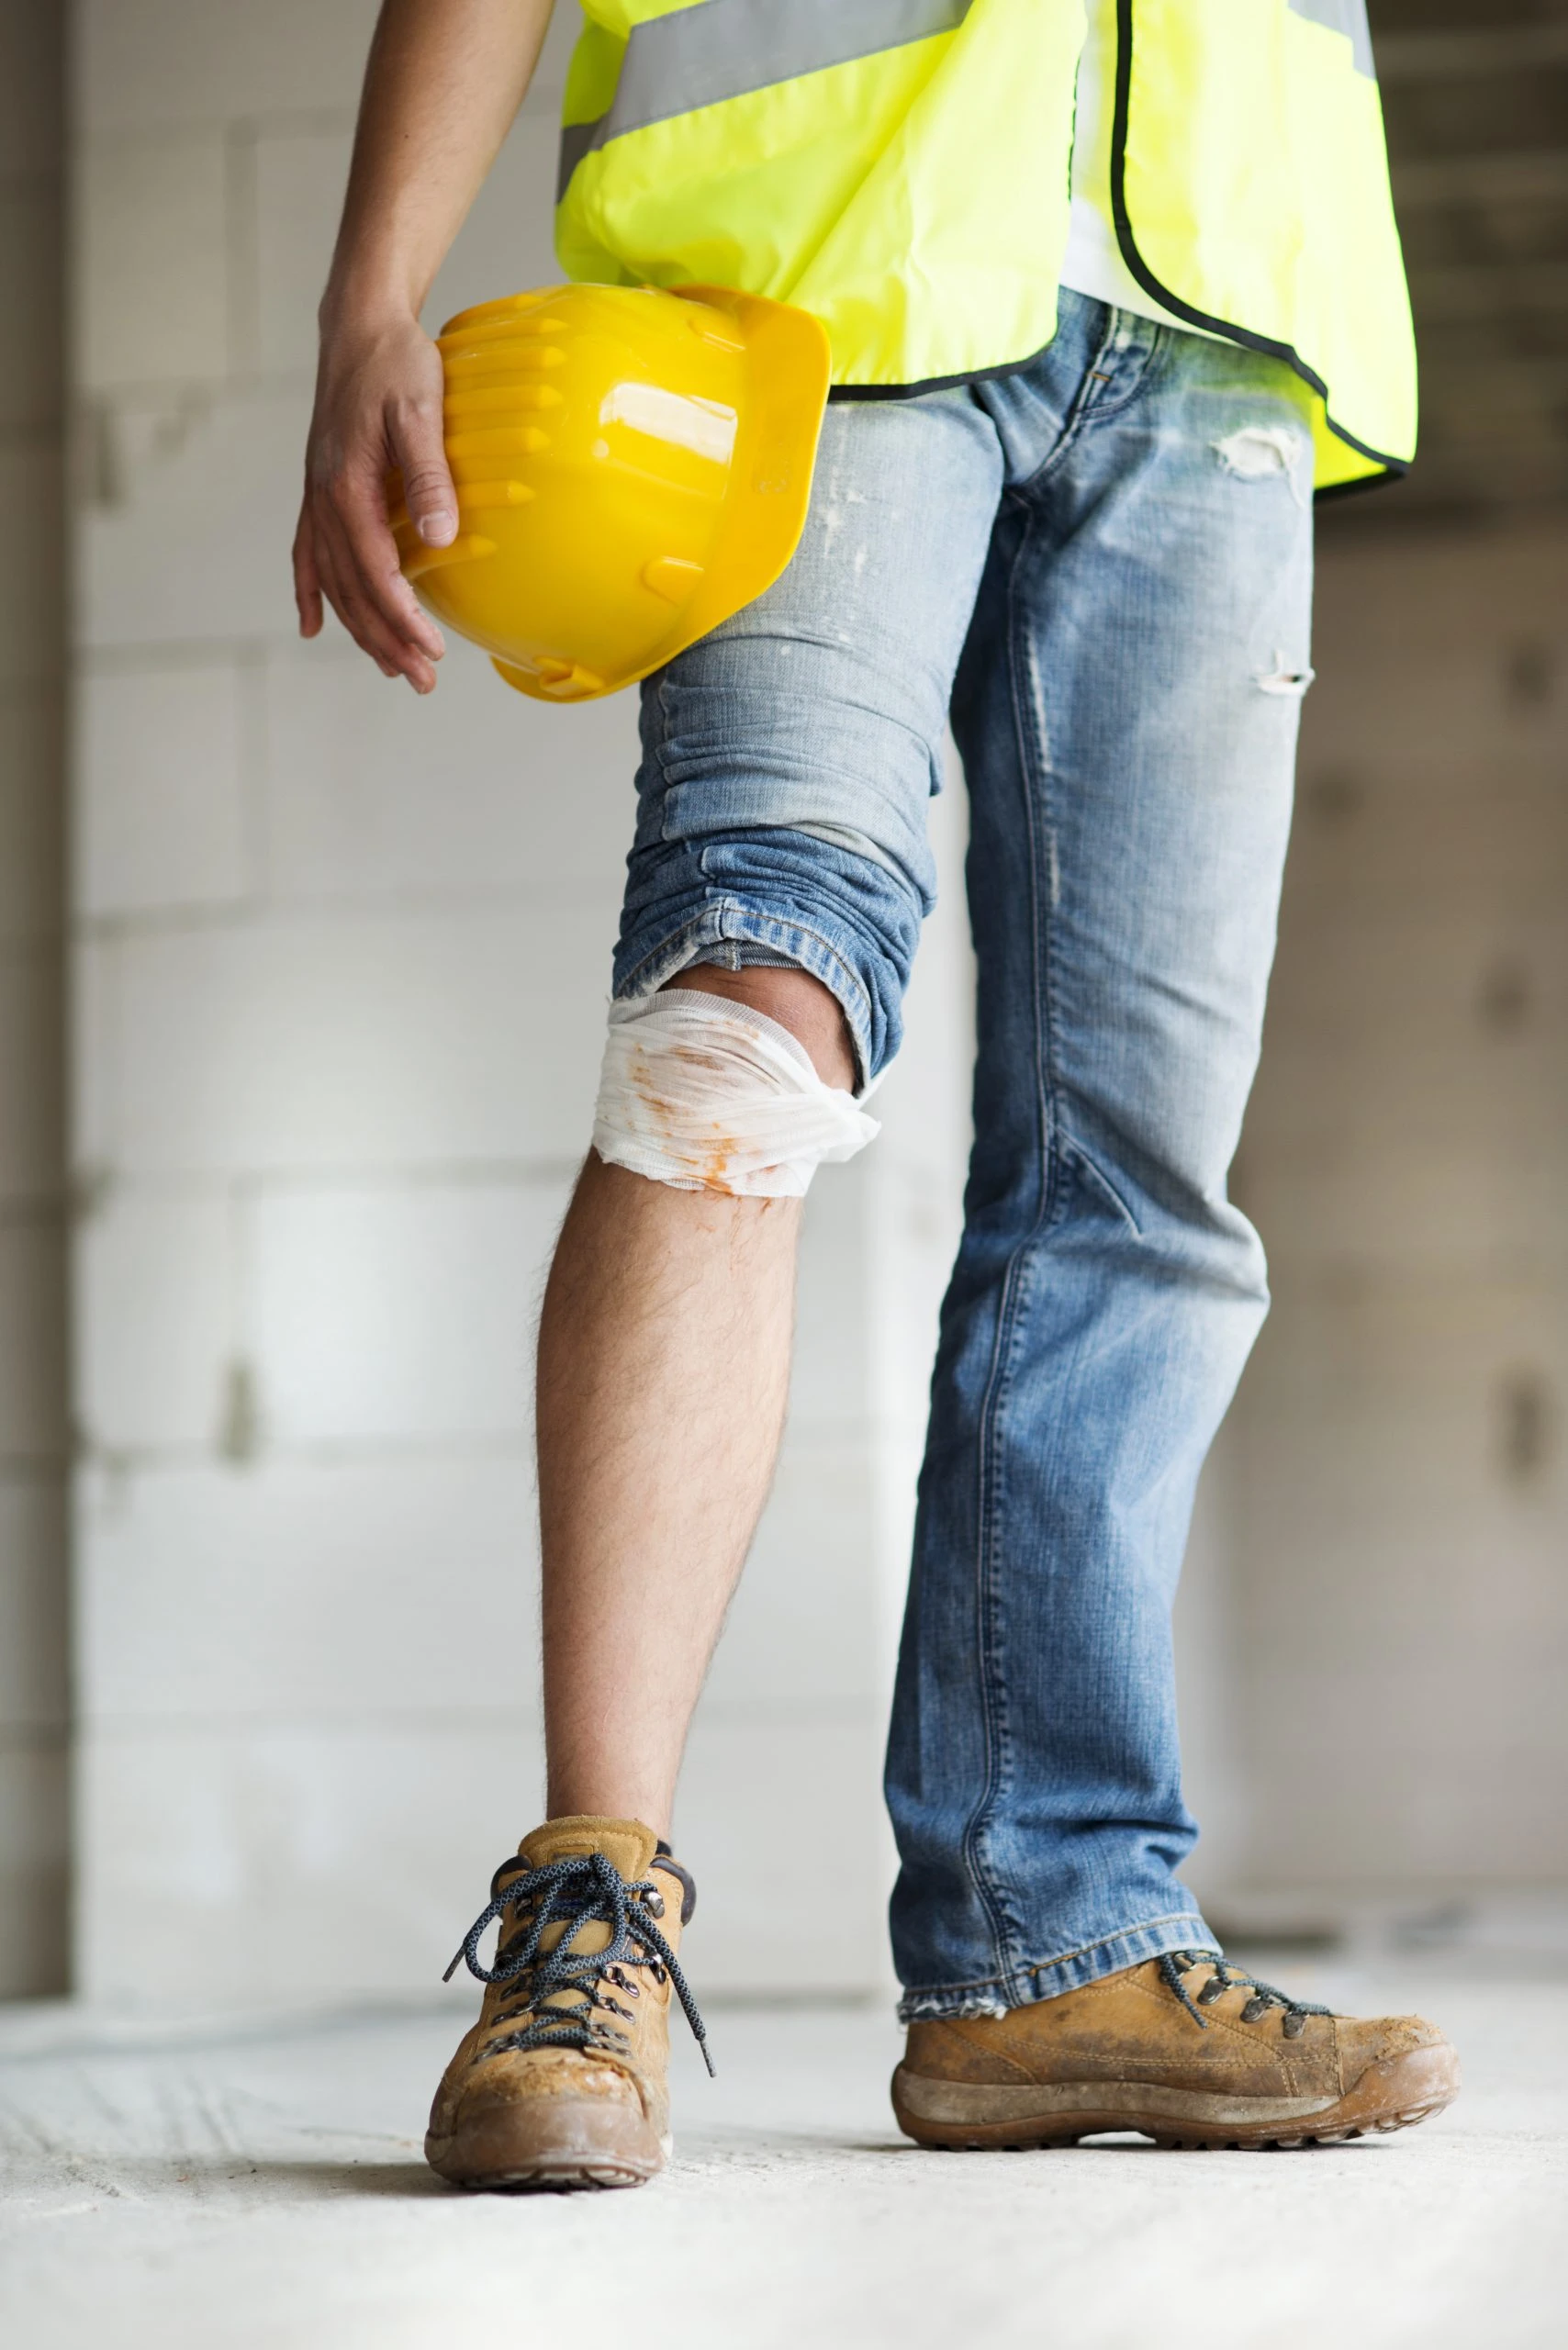 graphicstock construction worker has an accident while working on new house B0gwzv0qZb scaled